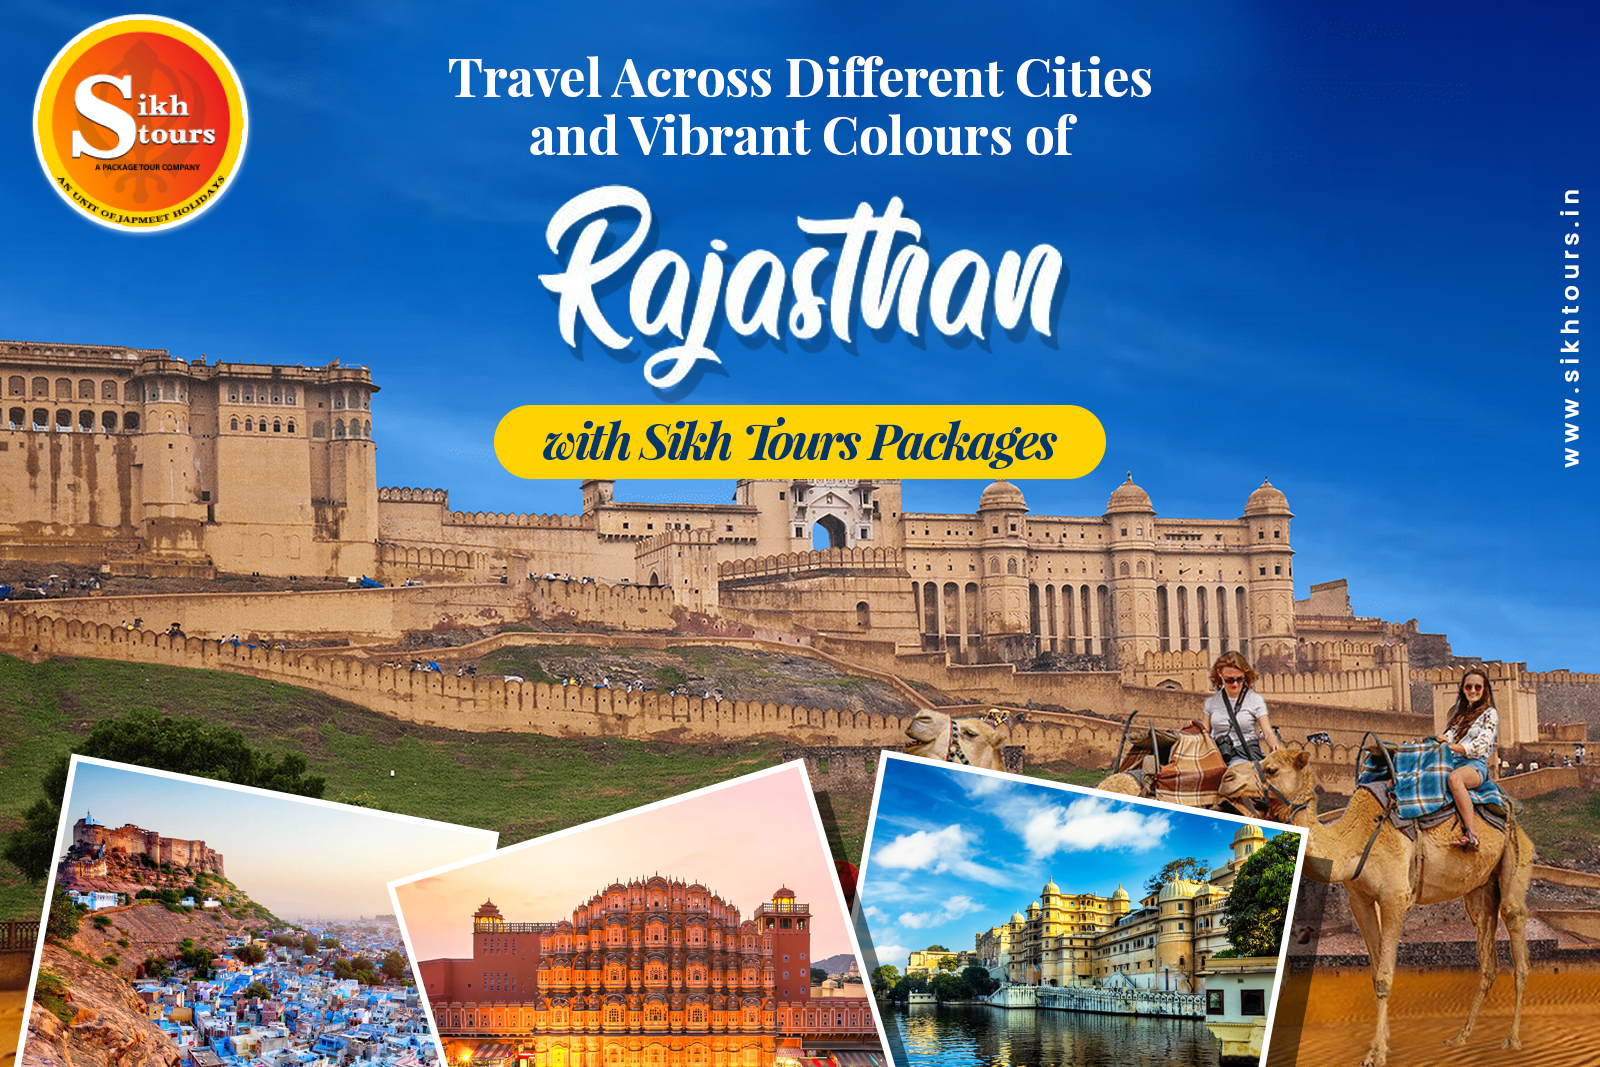 Travel Across Different Cities and Vibrant Colours of Rajasthan with Sikh Tours Packages